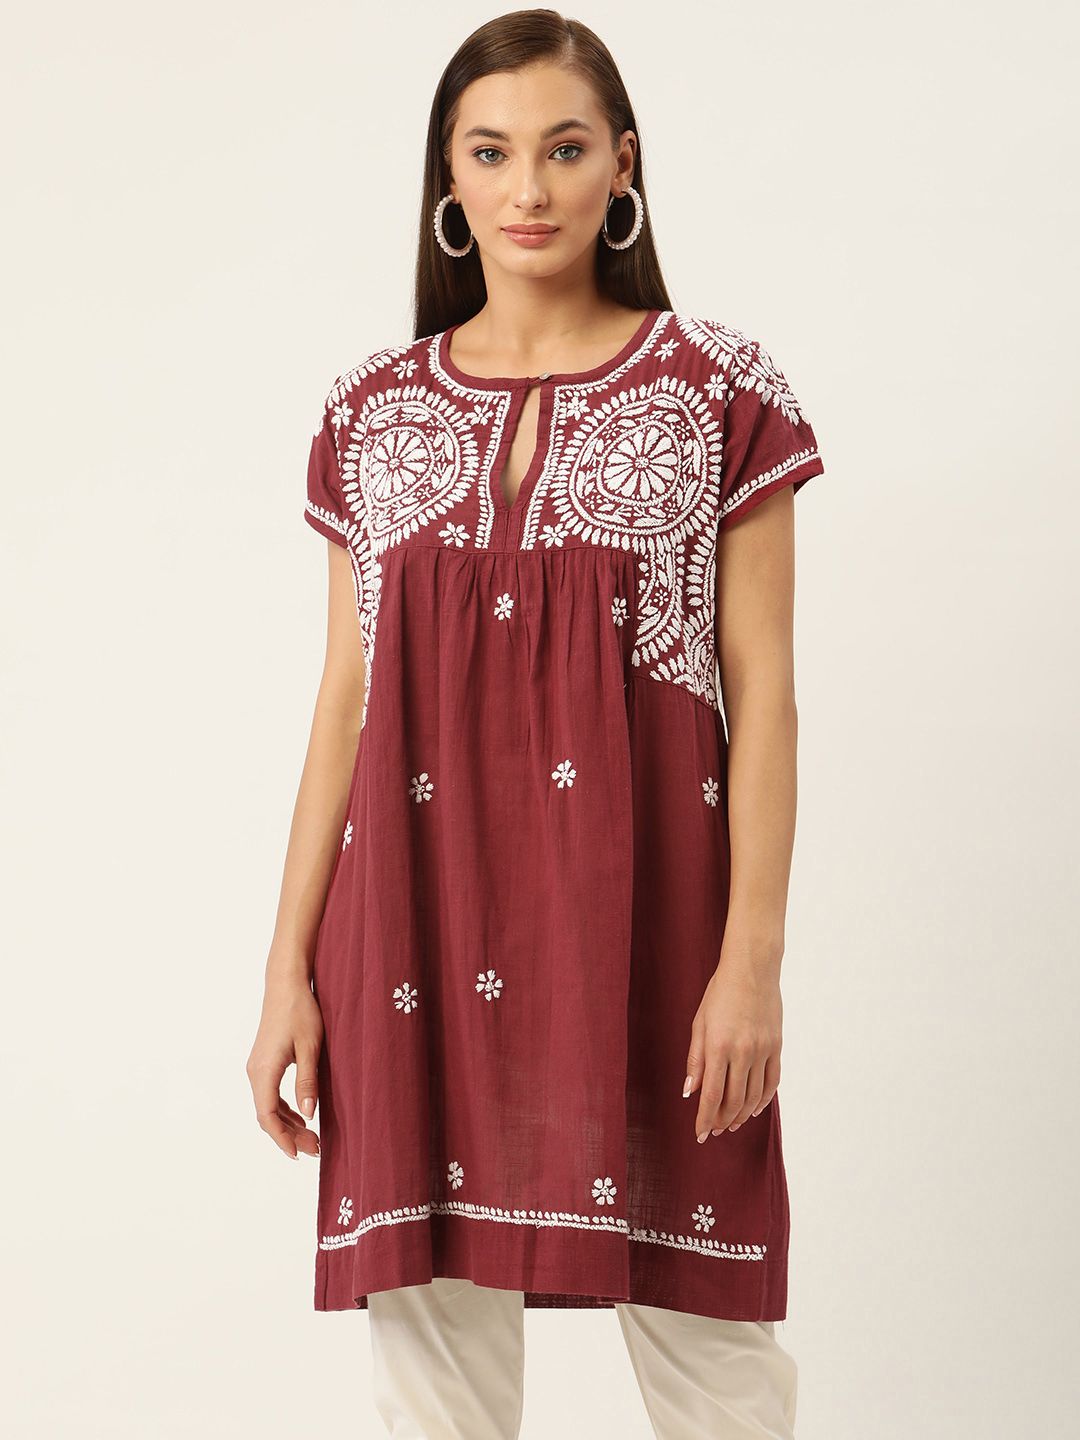 HOUSE OF KARI Maroon Cotton Embroidered Tunic Price in India